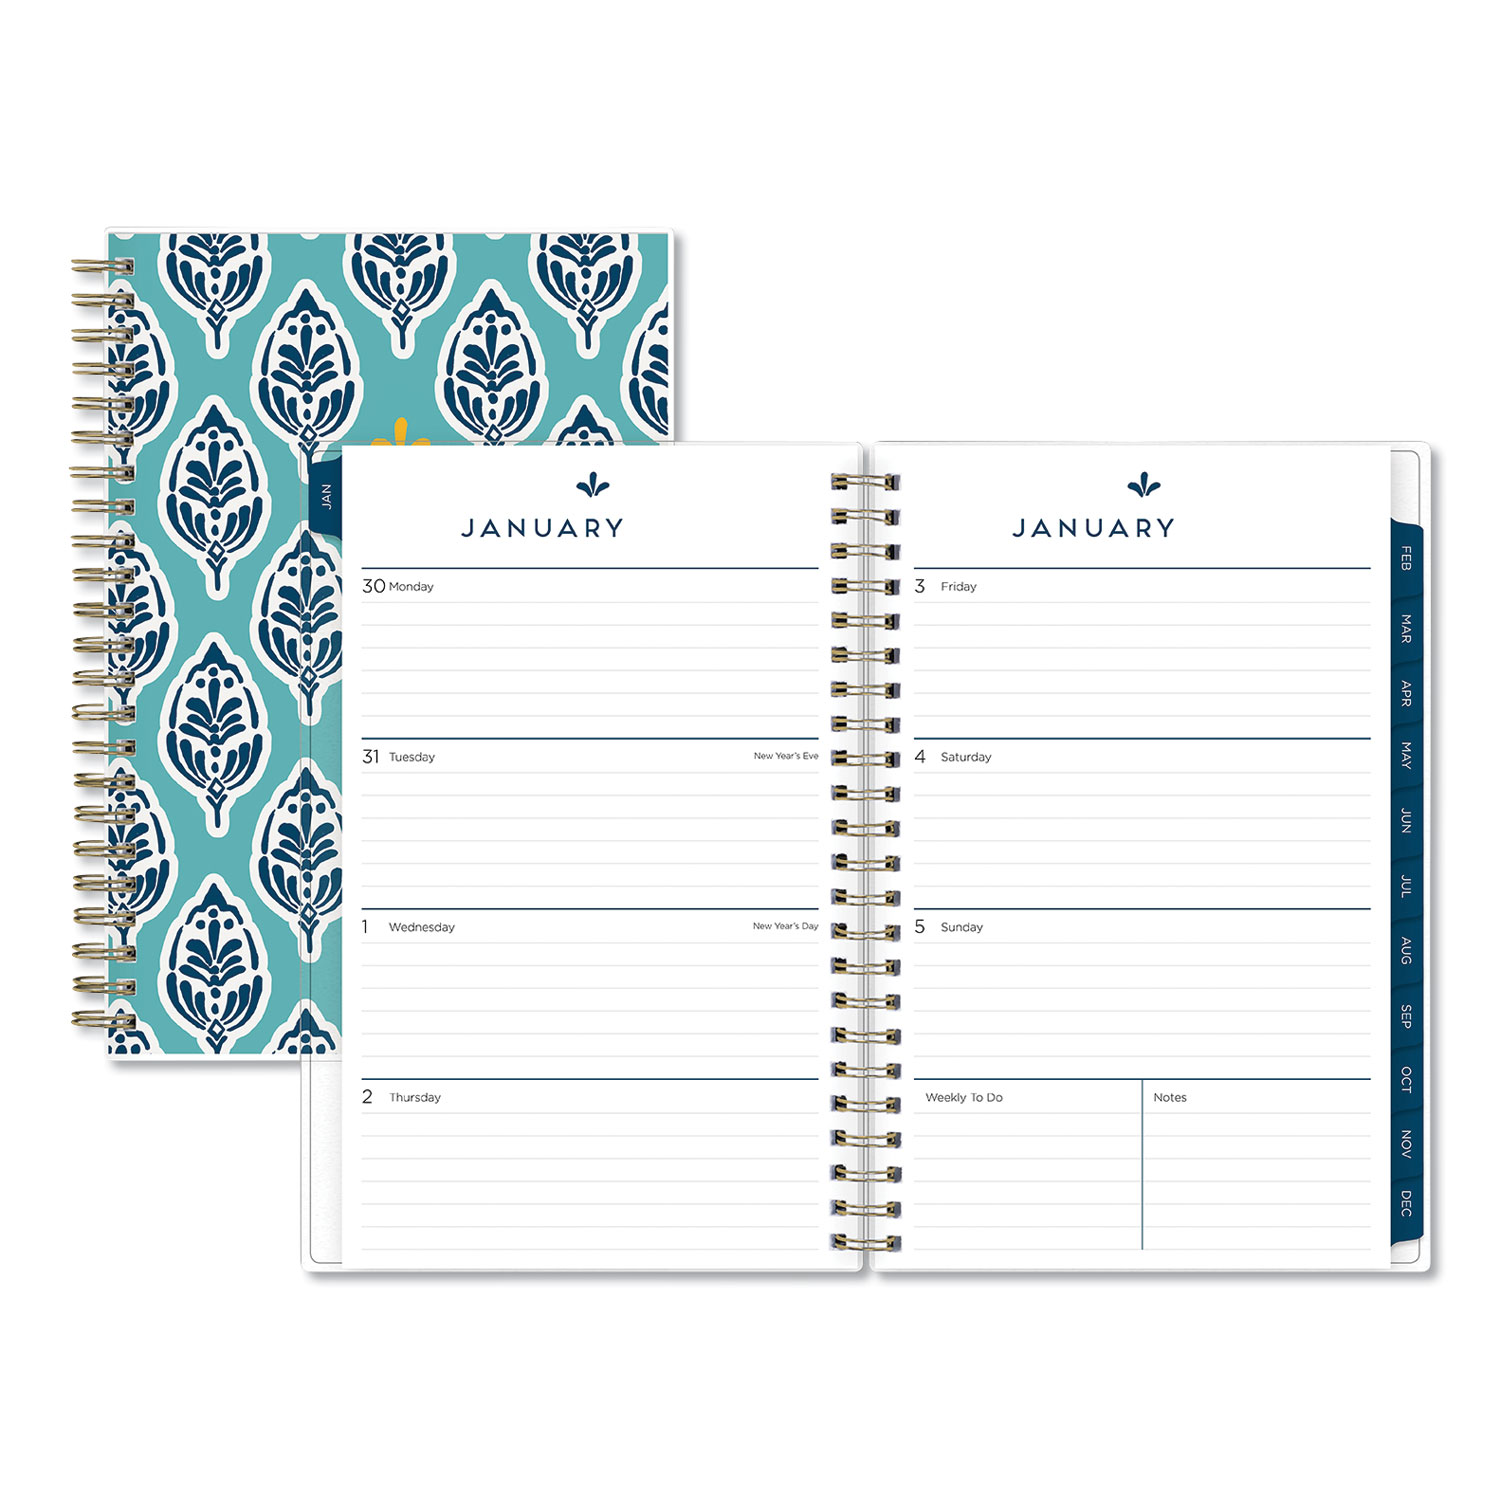  Blue Sky 110570 Sullana Weekly/Monthly Planner, 8 x 5, Teal Cover, 2020 (BLS110570) 